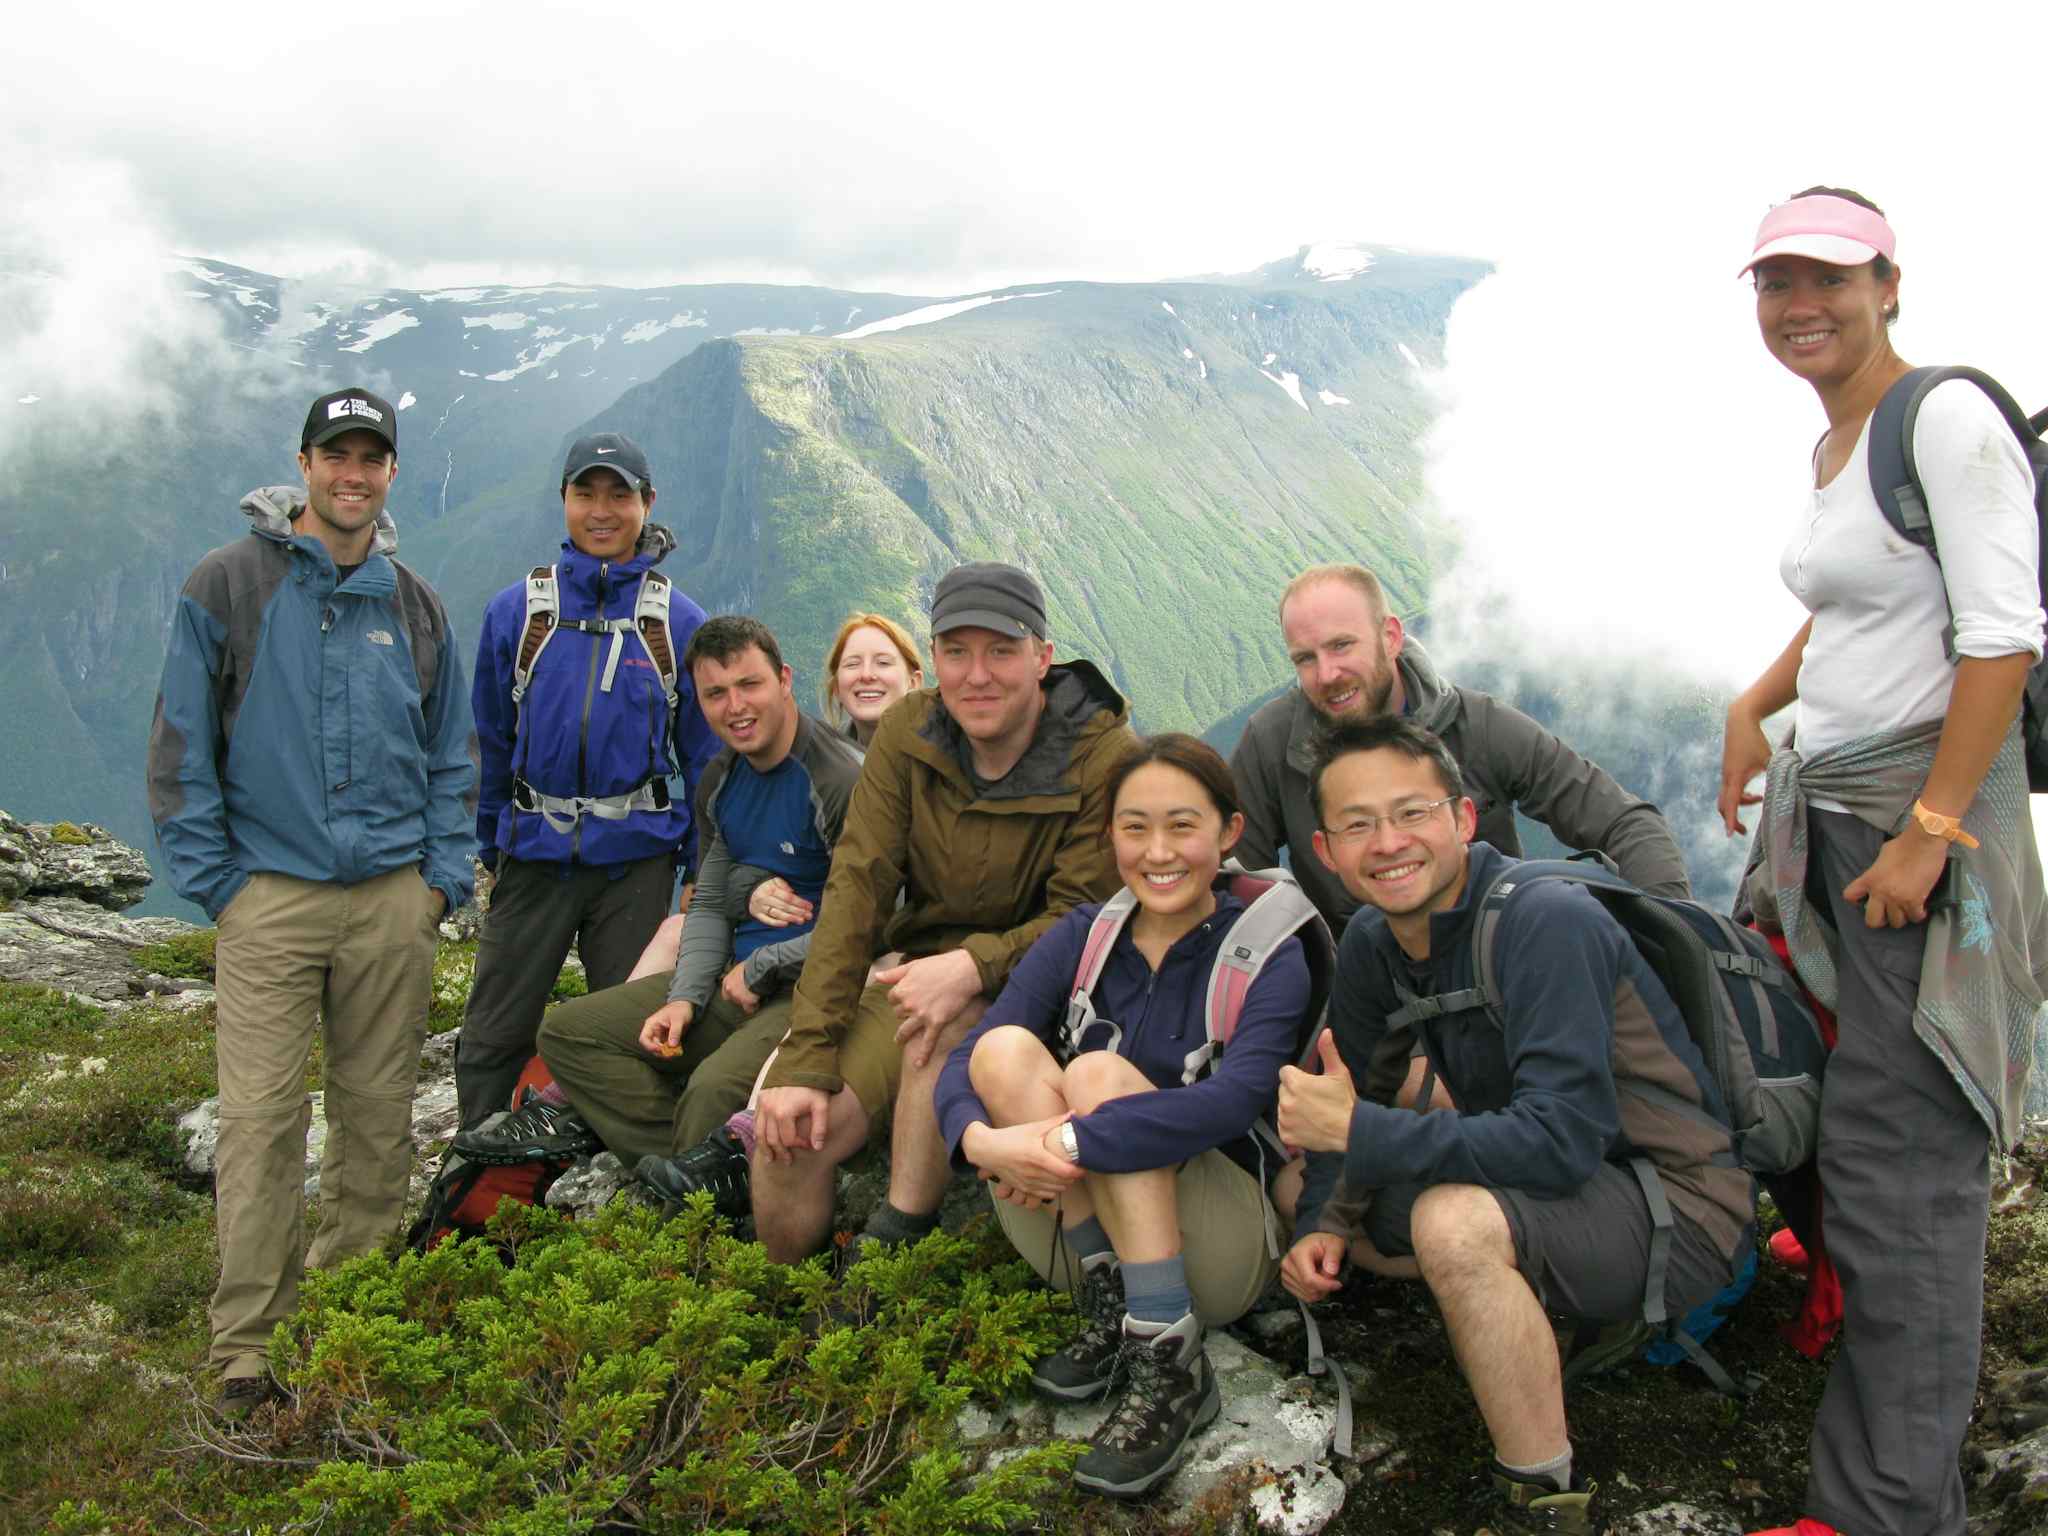 Hikers in the fjords, Norway
Host image: Nordic Ventures